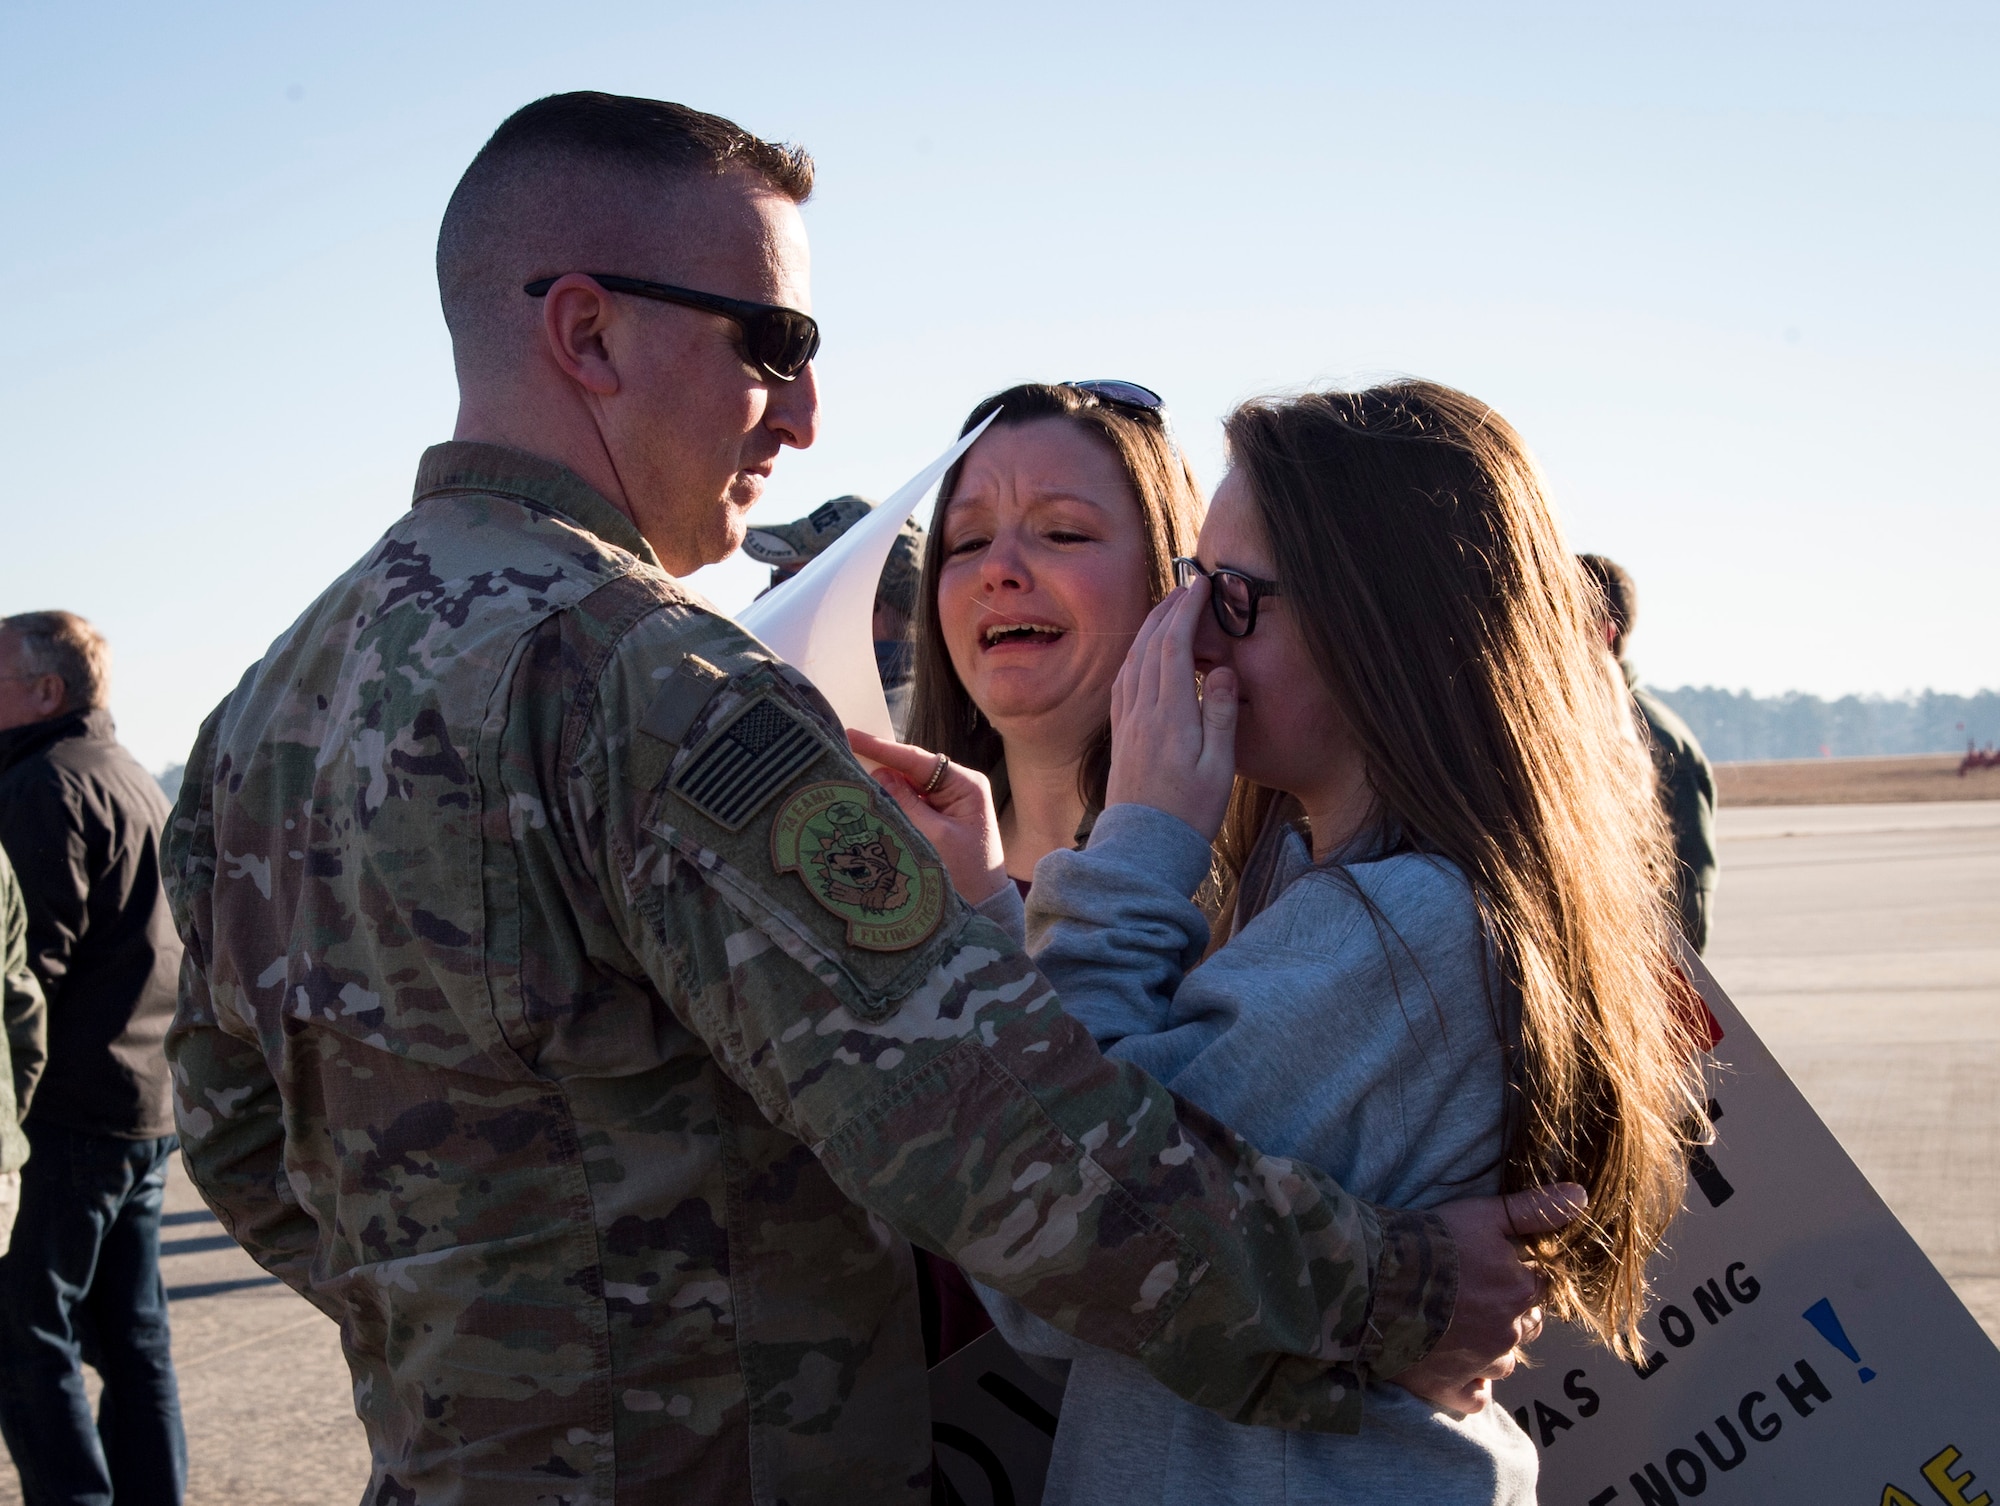 A family shares a moment during a redeployment ceremony for the 74th Fighter Squadron, Jan. 19, 2018, at Moody Air Force Base, Ga. Over 300 Airmen from Team Moody deployed for seven months in support of Operation Inherent Resolve to defeat ISIS in designated areas in Iraq and Syria. (U.S. Air Force photo by Andrea Jenkins)